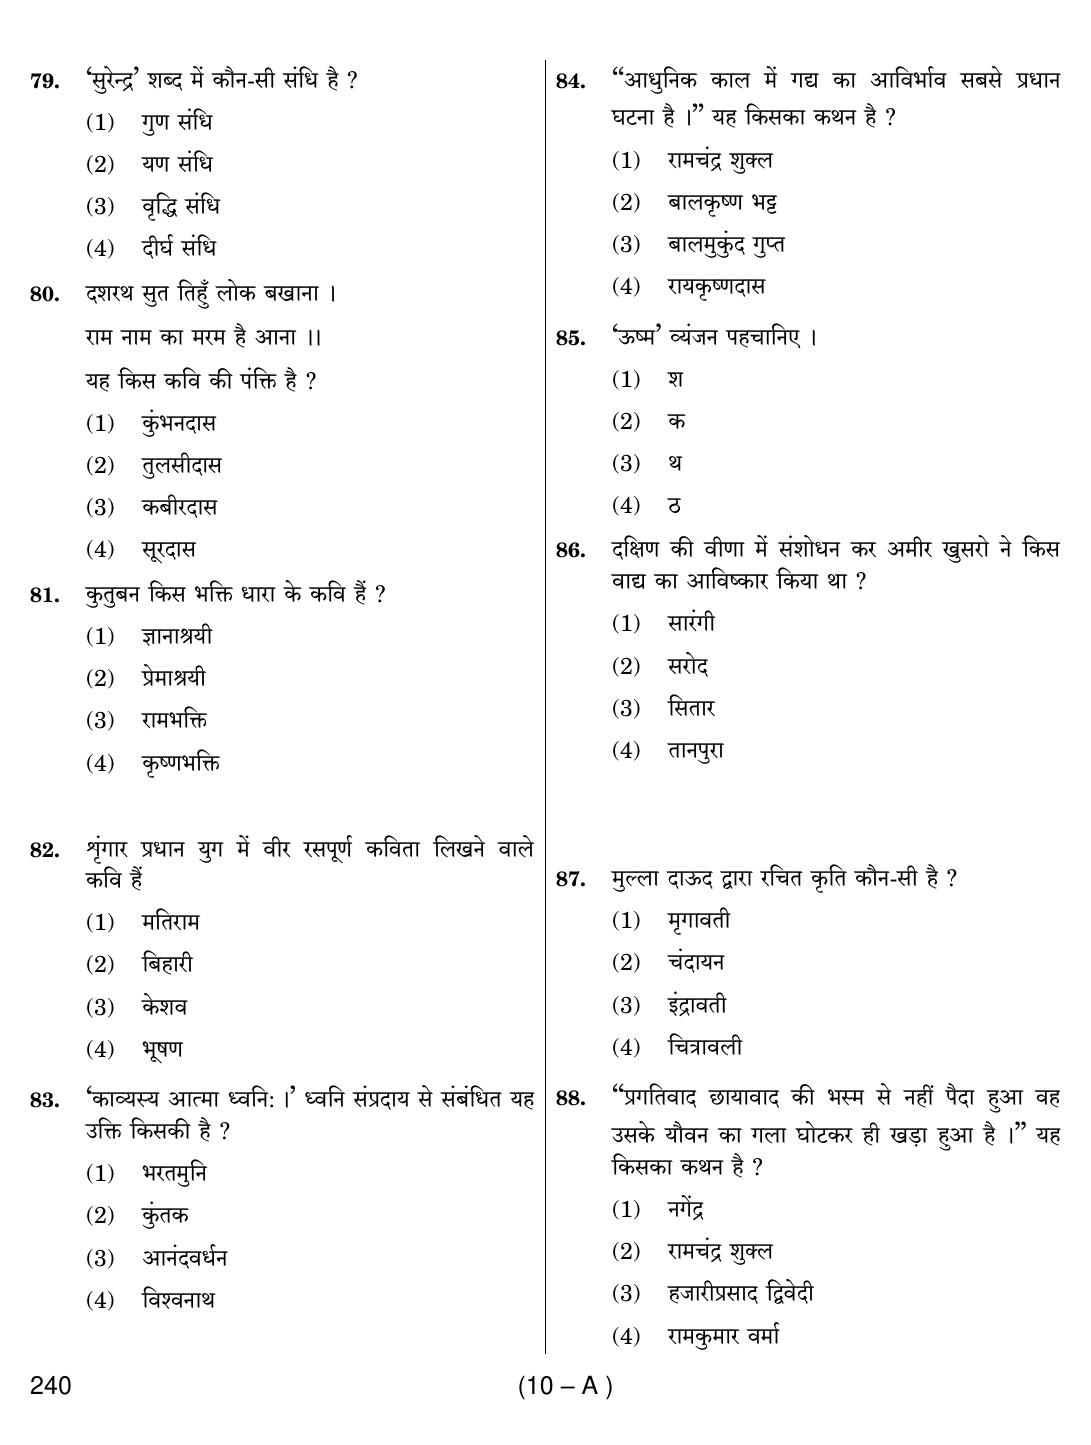 Punjab B.Ed Question Papers for Hindi Language - Page 10